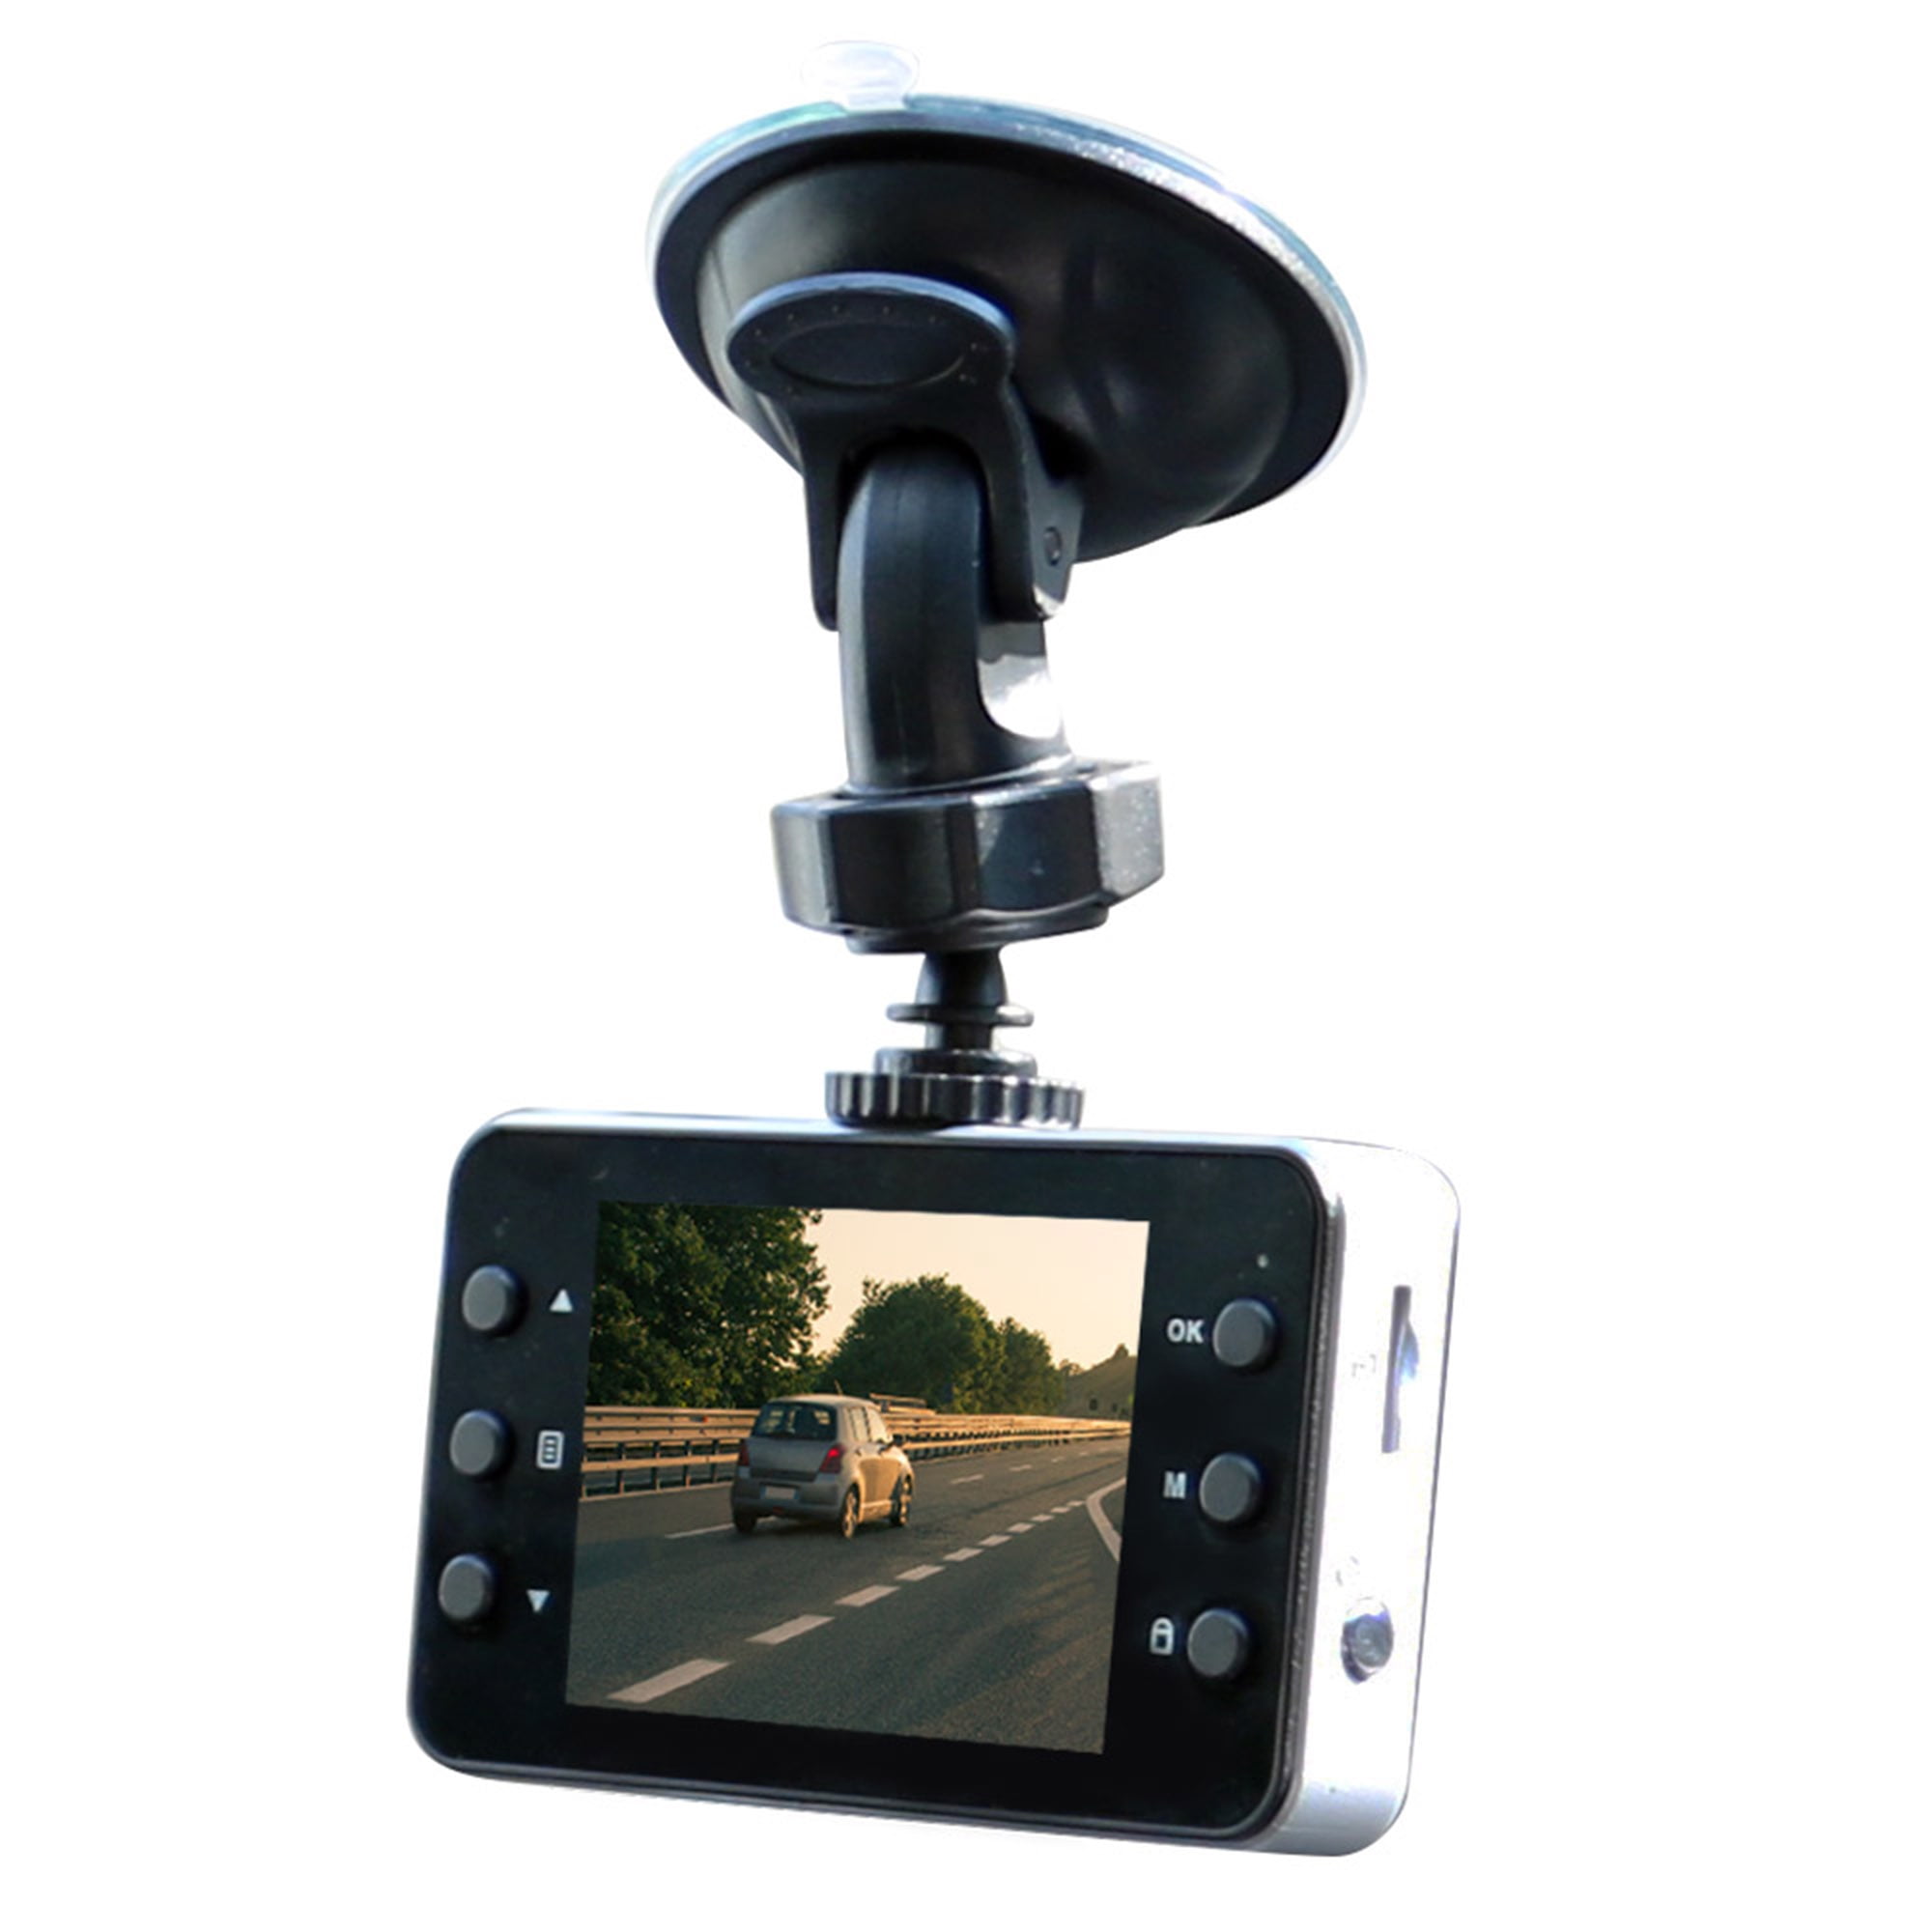 Dash Cam Mount Holder - Mirror Mount, Come with 15+ Different Joints,  Suitable for AUKEY, APEMAN, Rexing V1P, YI 2.7, Peztio, Roav, VaVa and  Most